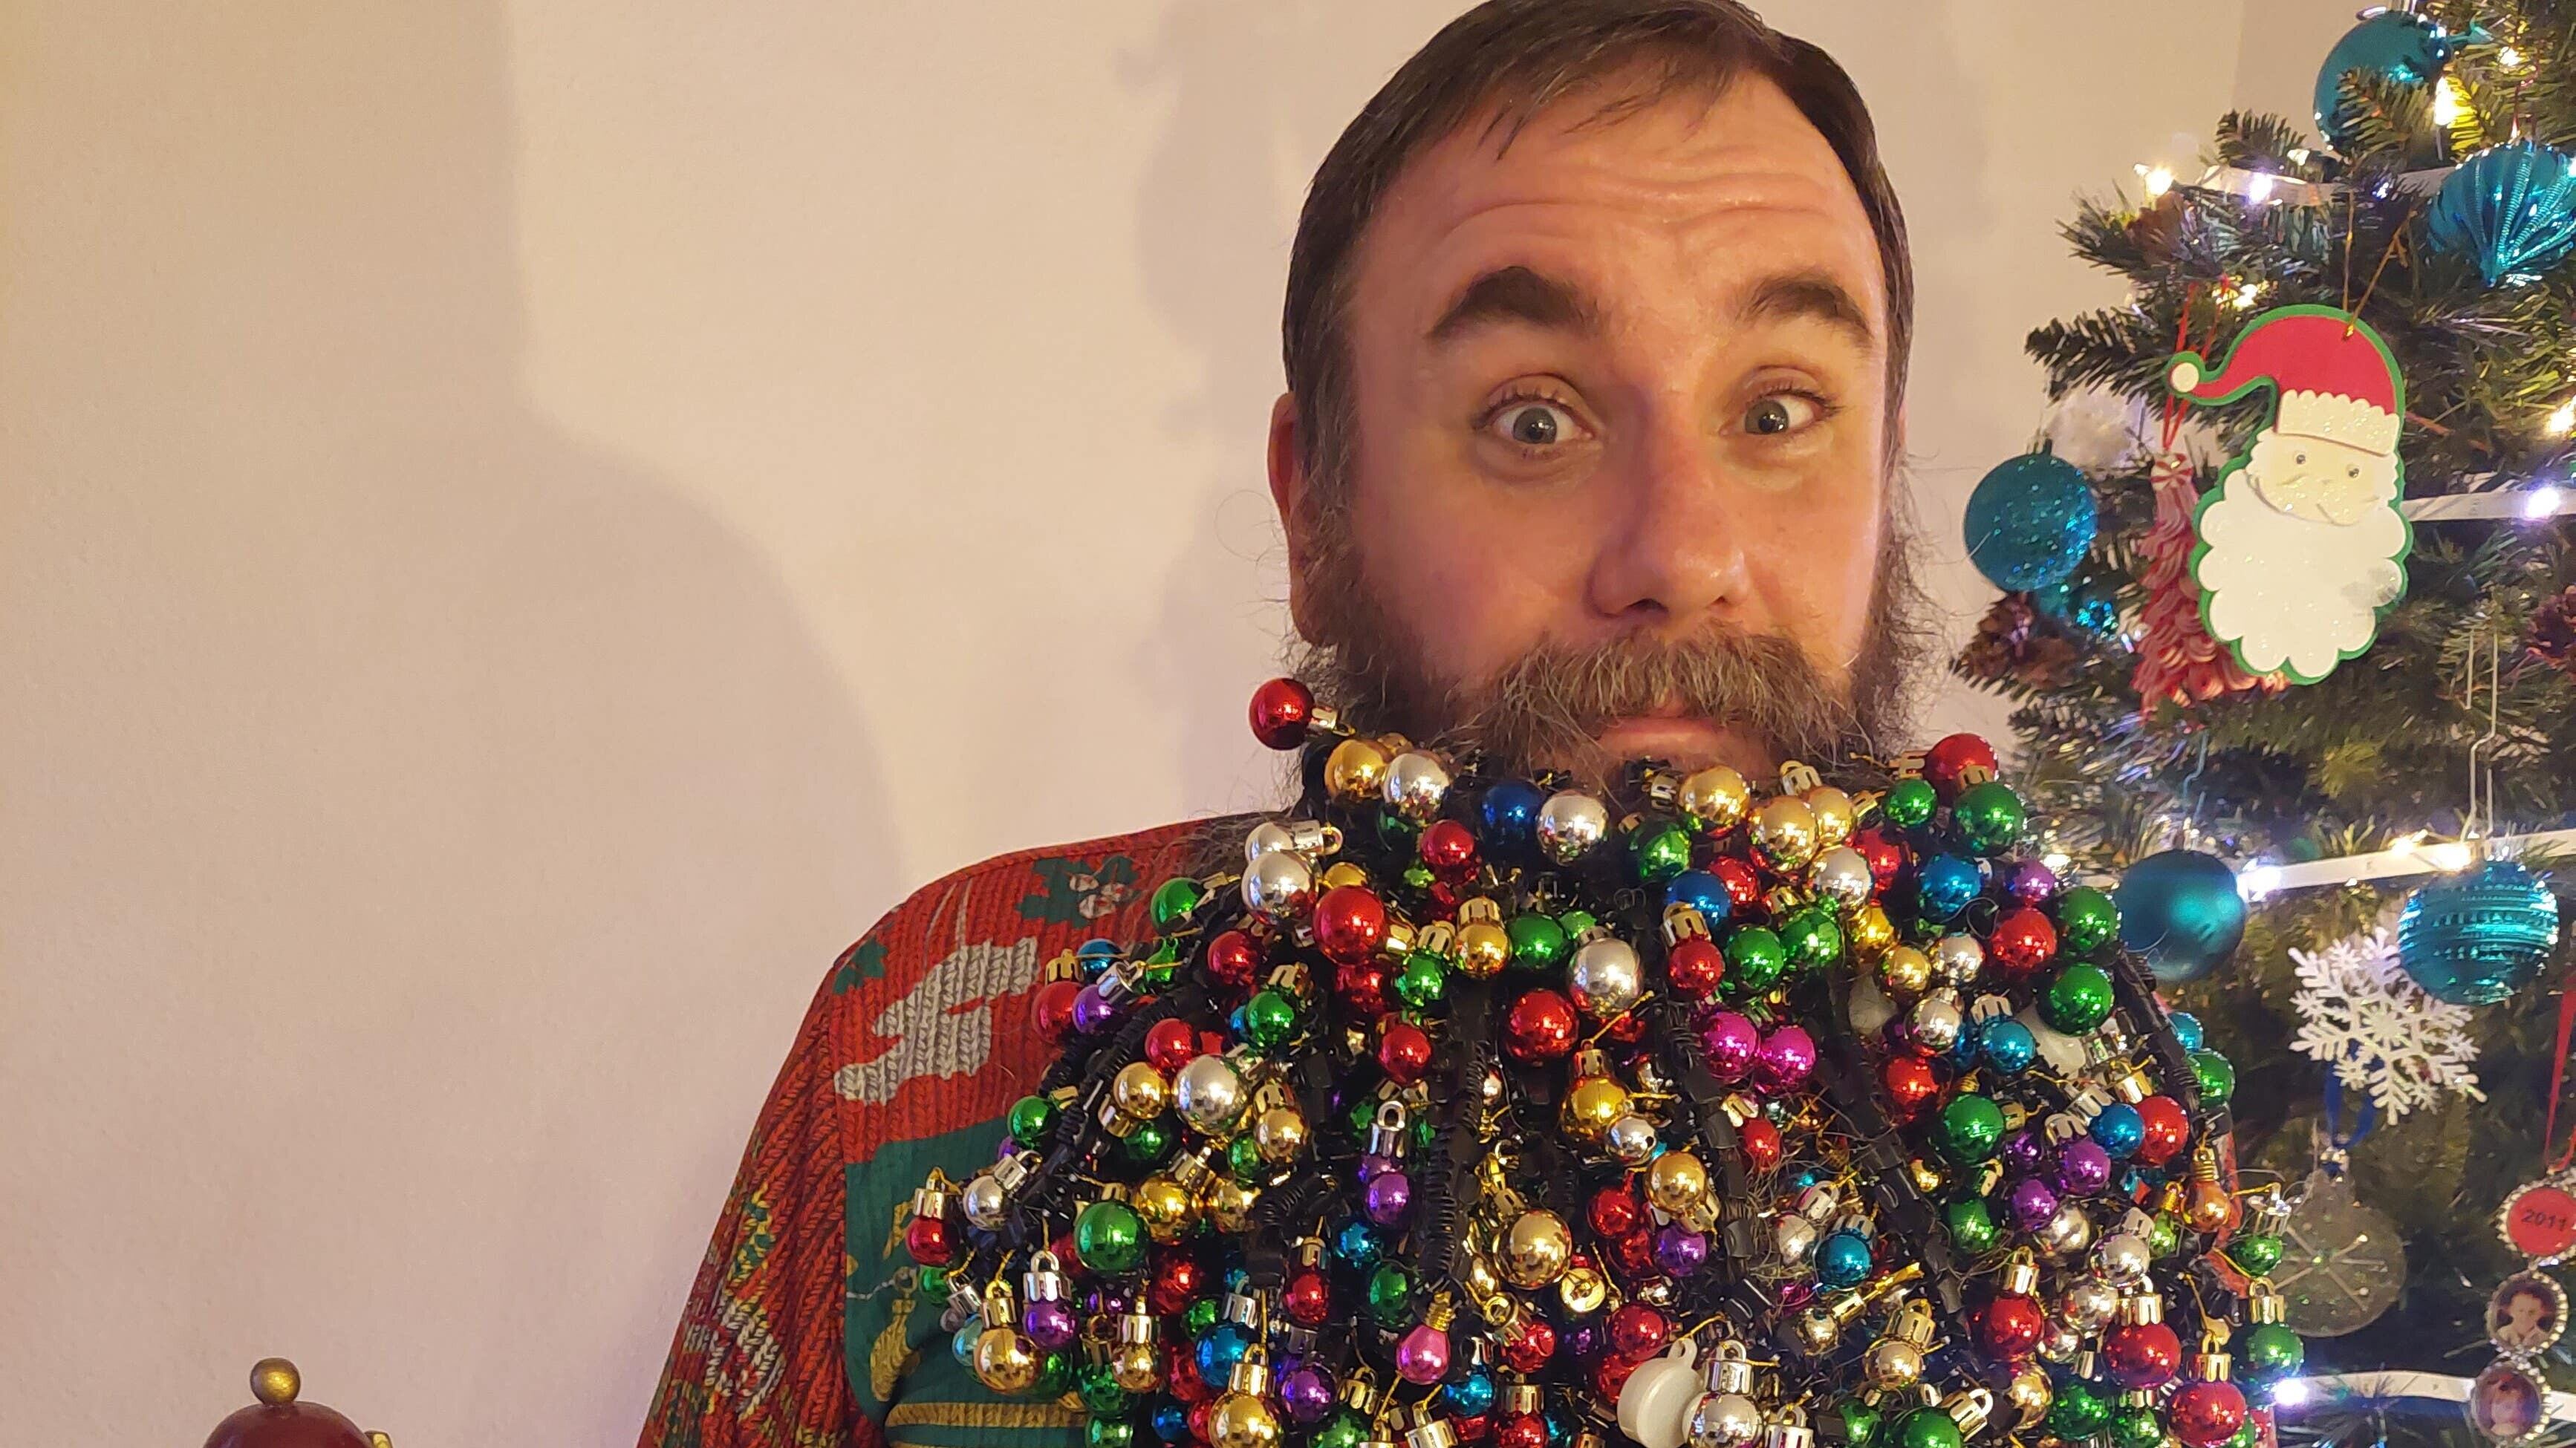 Joel Strasser has beaten his own world record this year with 710 baubles attached to his beard.